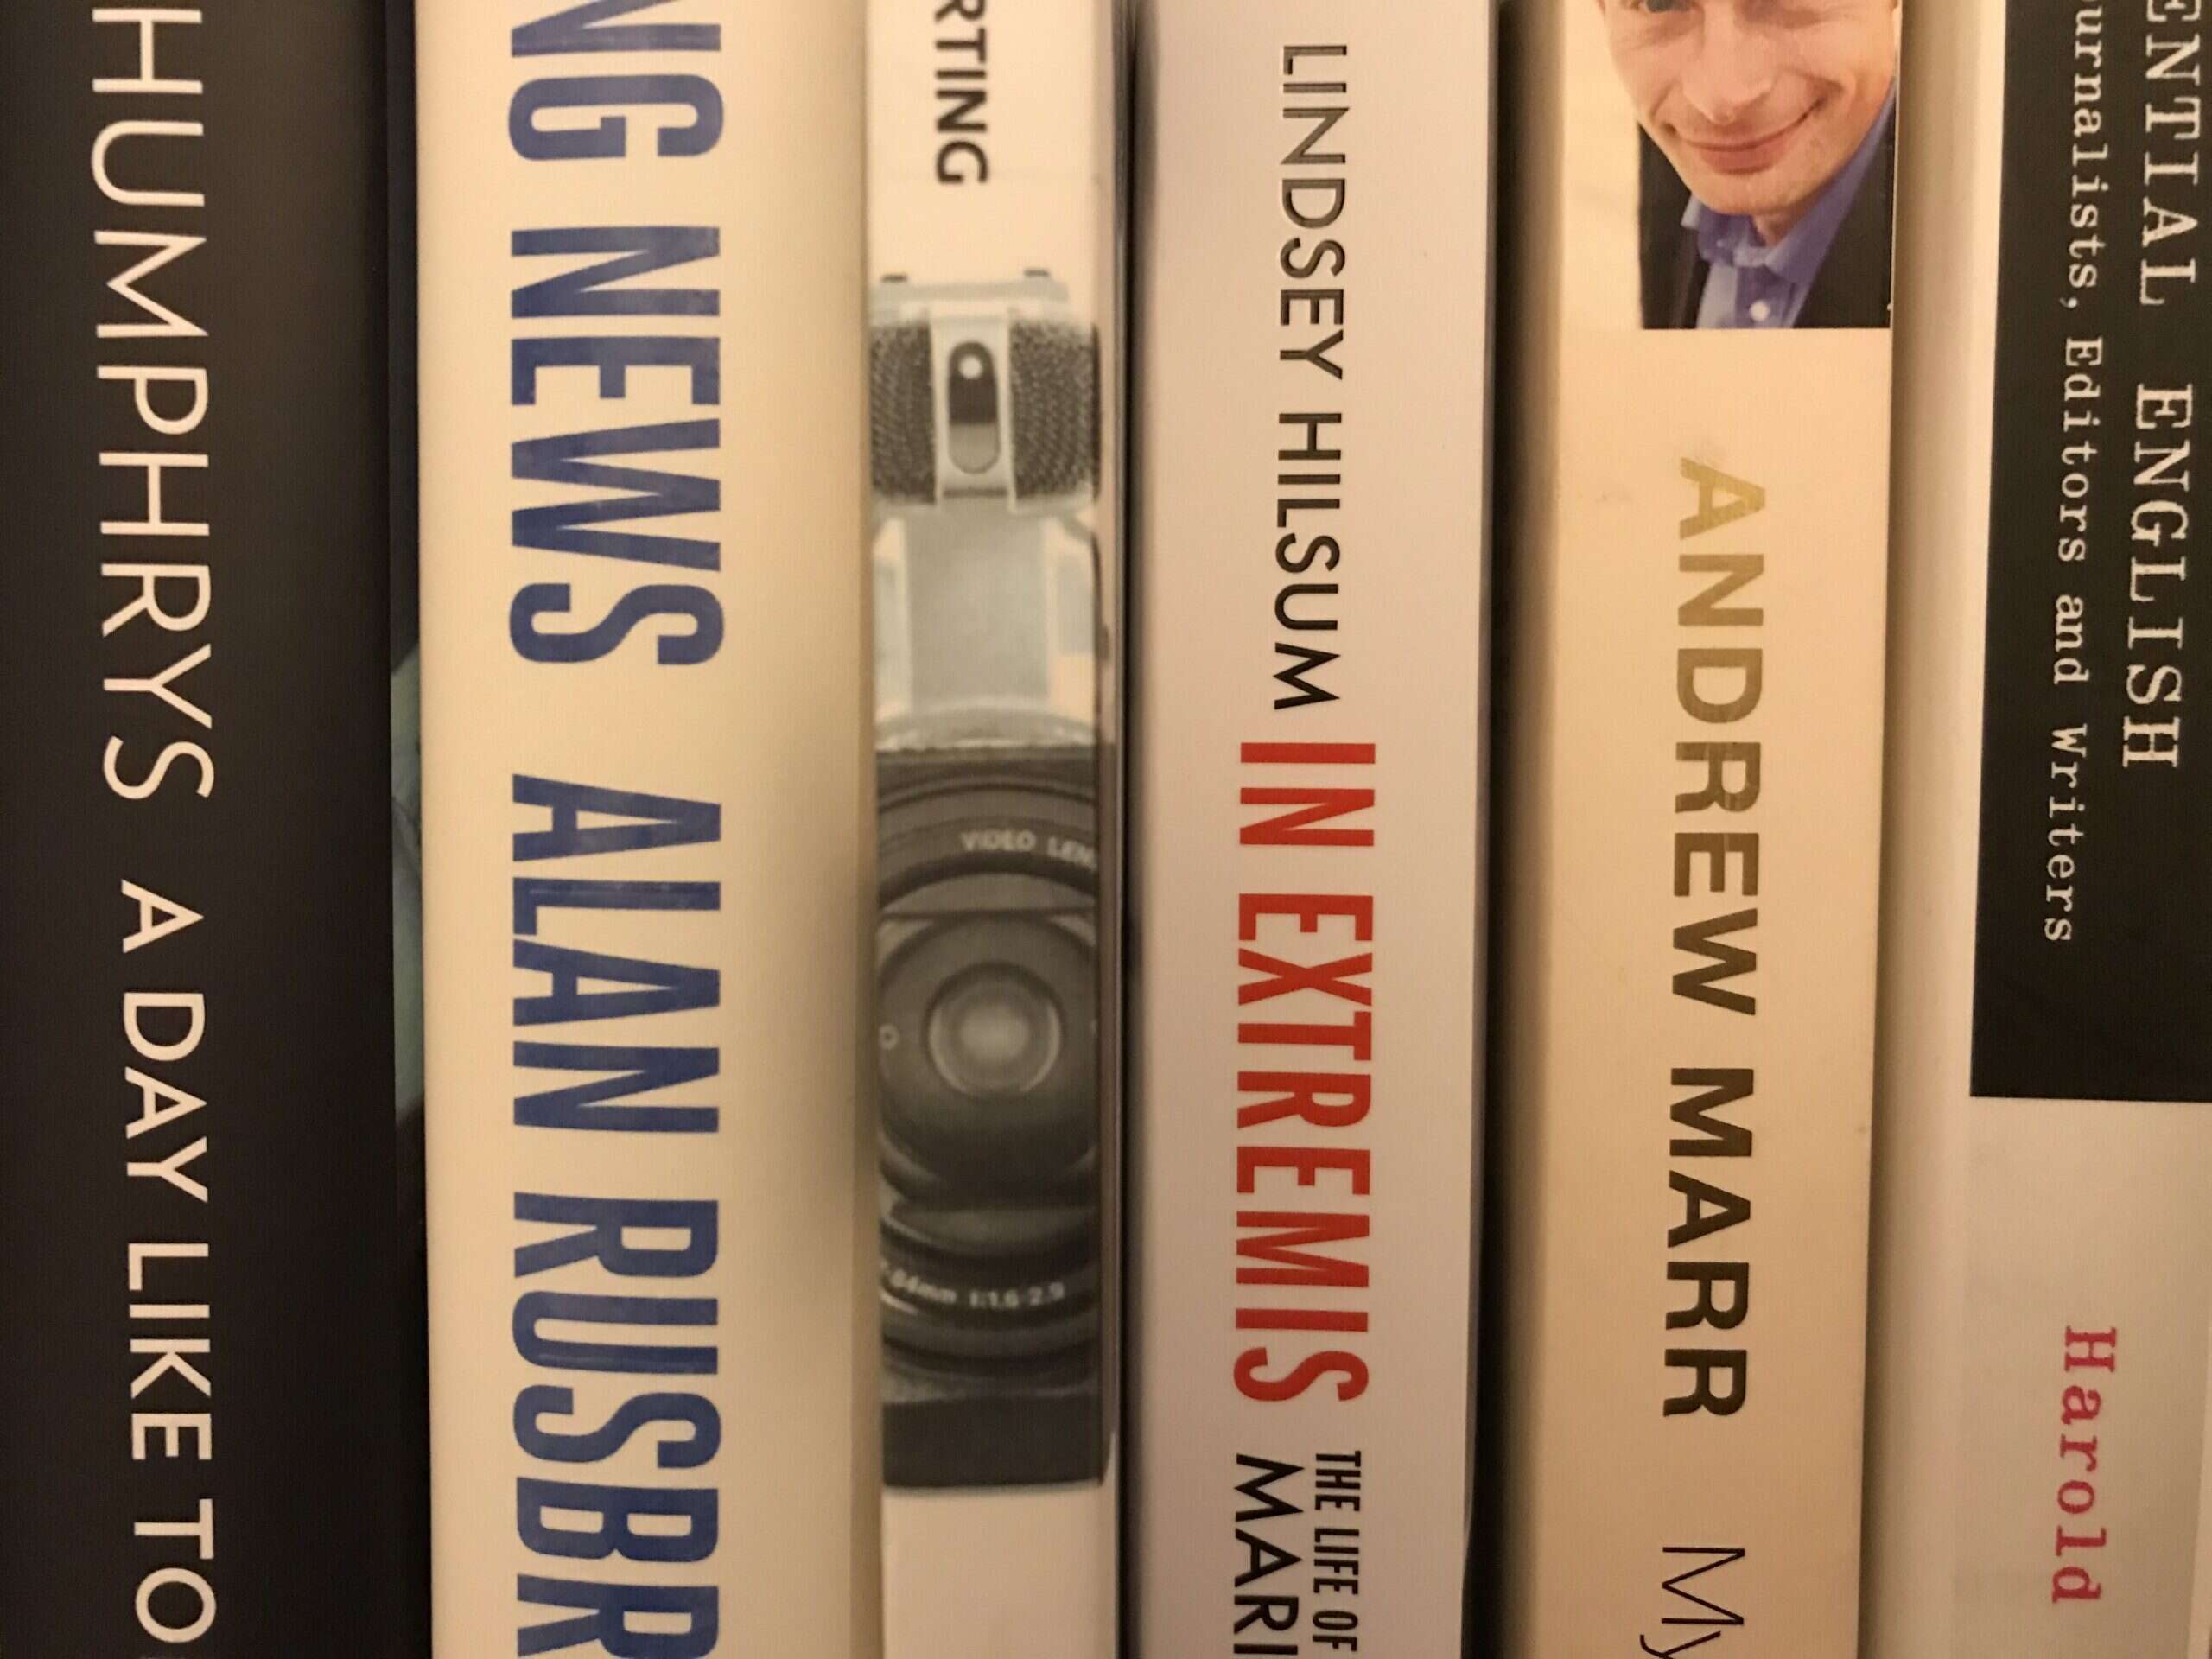 Books about journalism||||||||||||||